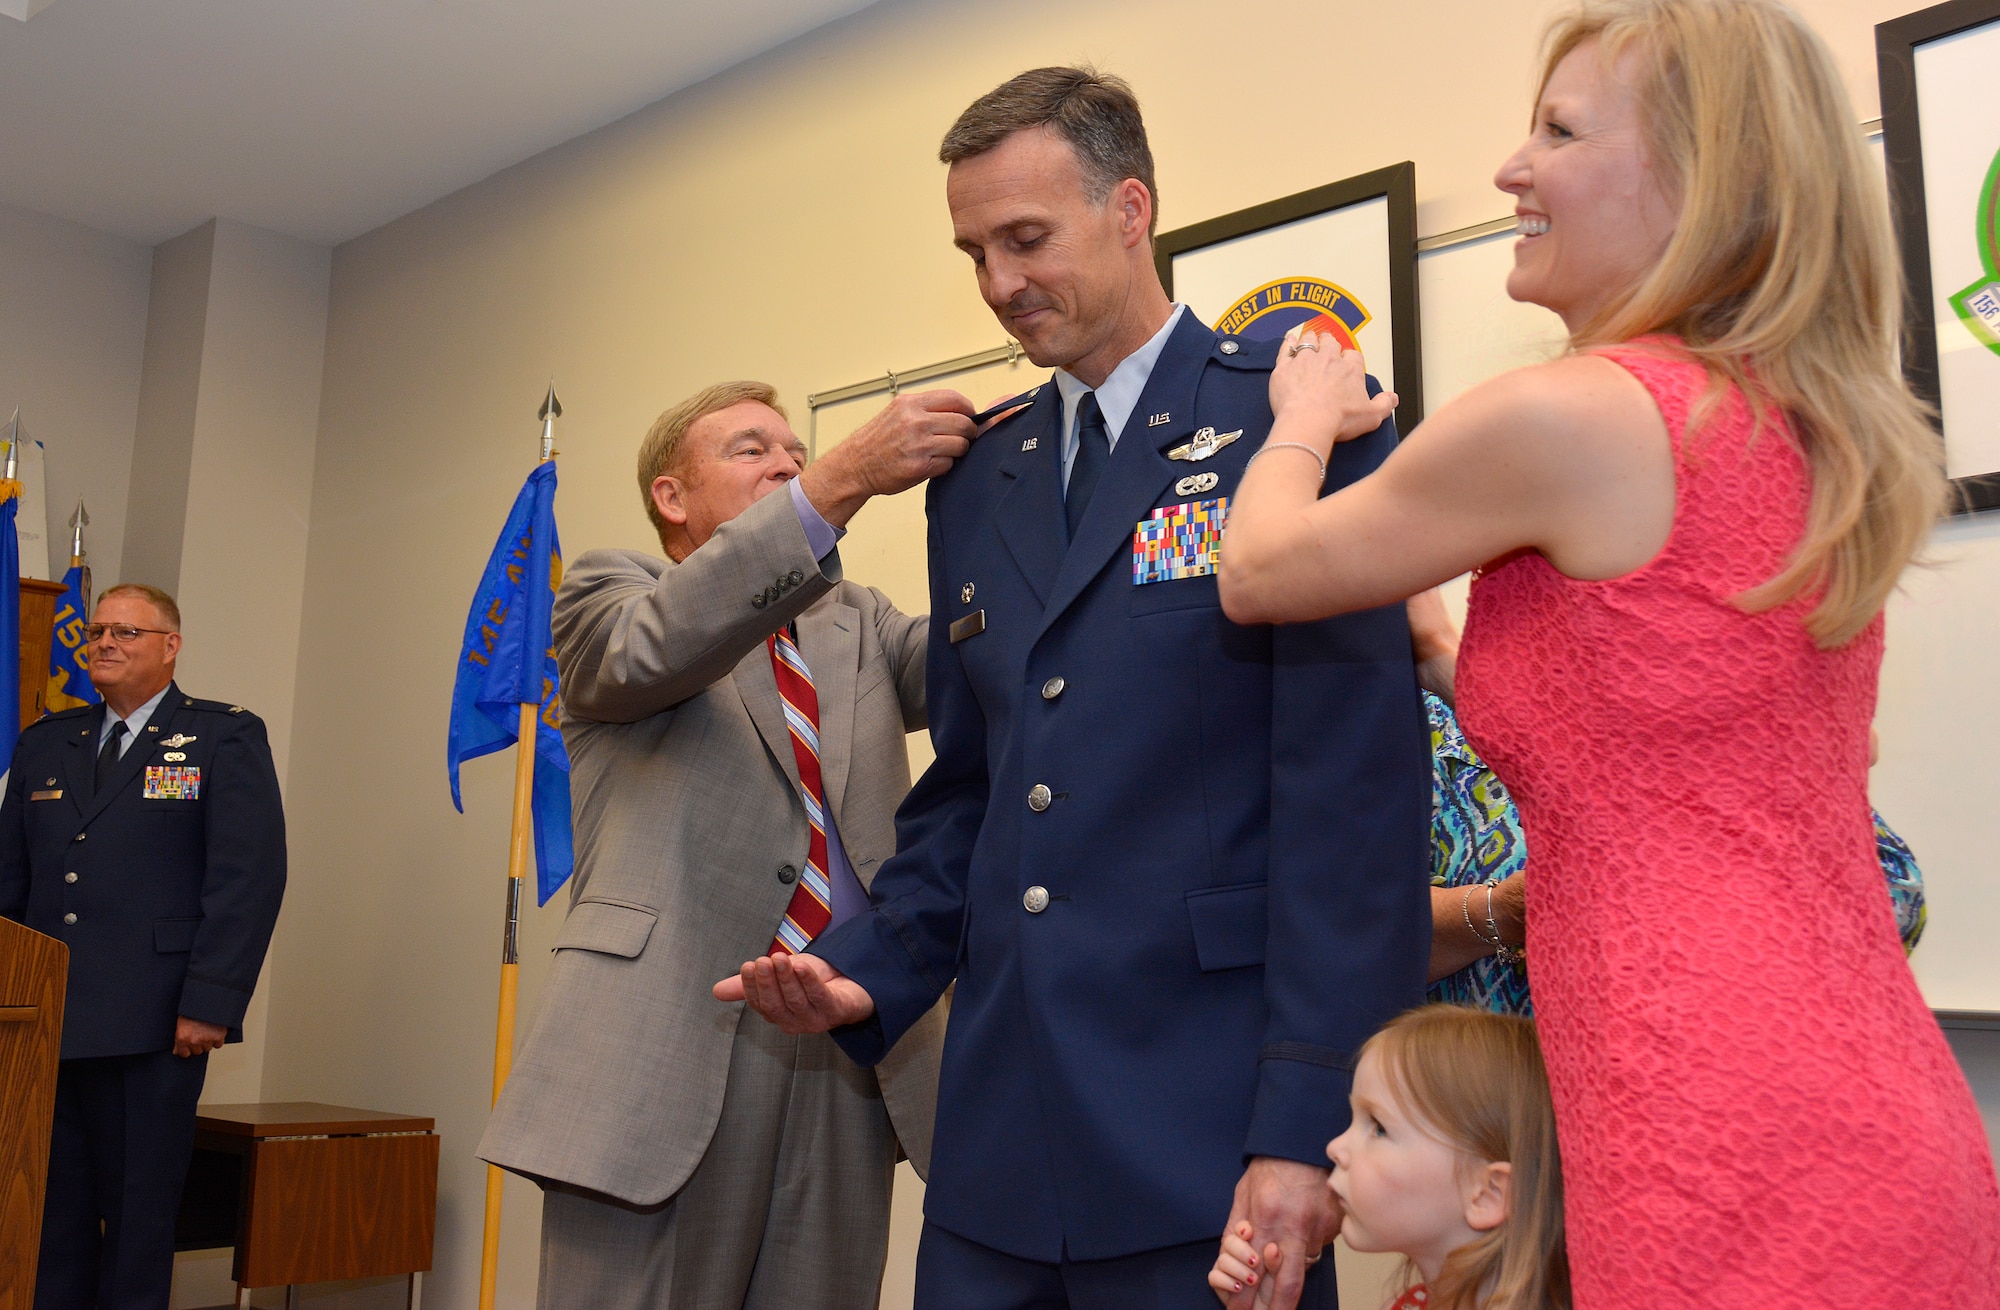 U.S. Air Force Lt. Col. Joseph H. Stepp IV, is pinned to the rank of colonel during a promotion ceremony held in his honor at the North Carolina Air National Guard Base, Charlotte Douglas International Airport, June 6, 2015. Stepp’s father and wife had the honor of removing the oak-leafed, lieutenant colonel rank from his uniform and replacing it with an eagle with outstretched wings – the insignia for colonel. (U.S. Air National Guard photo by Senior Airman Laura Montgomery, 145th Public Affairs/Released)